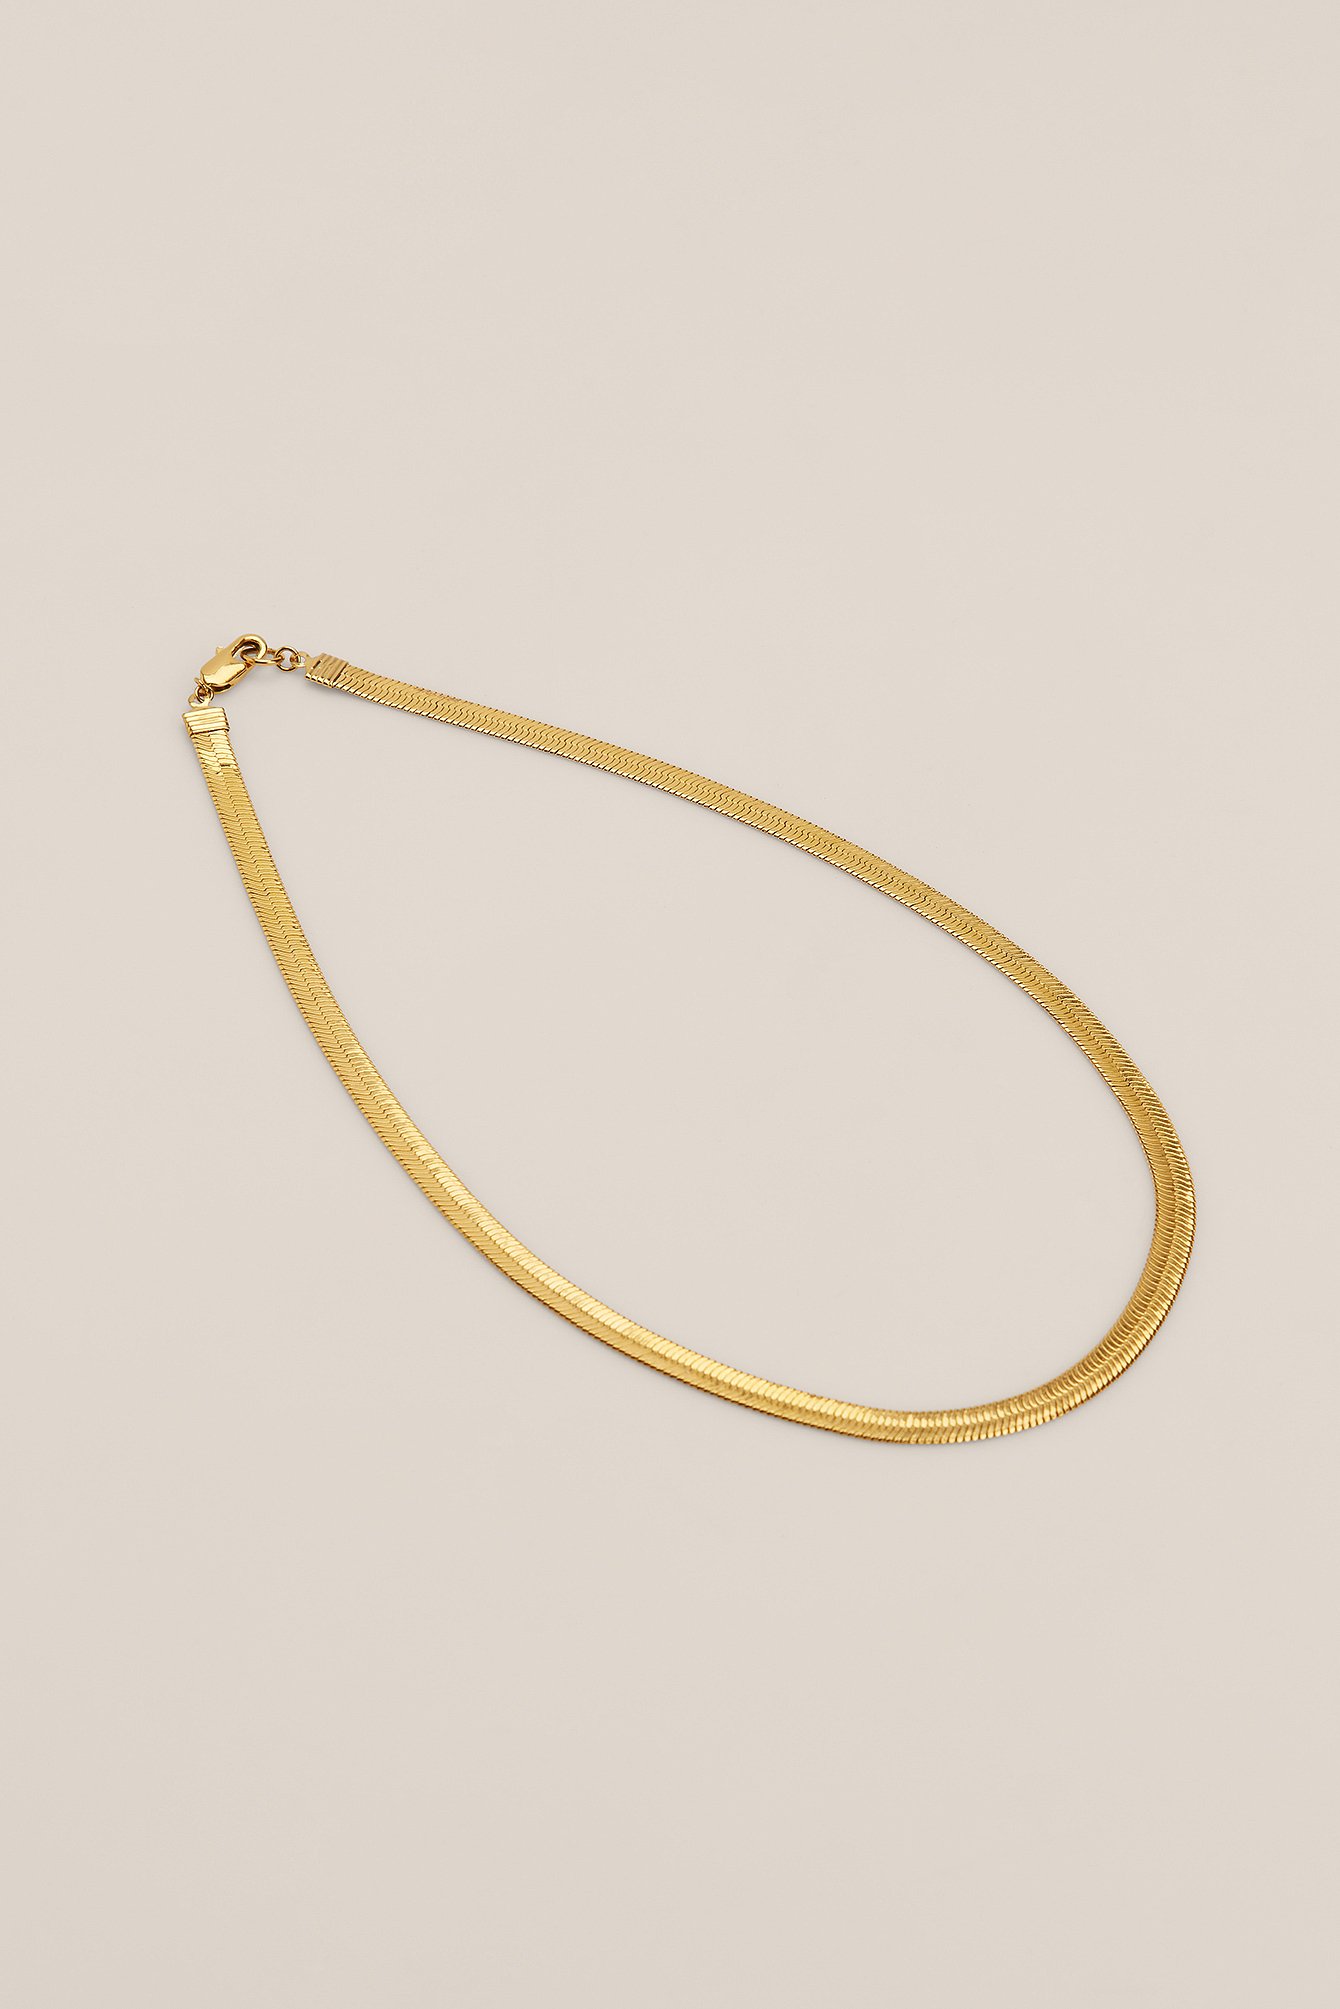 Gold Gold Plated Glossy Chubby Necklace